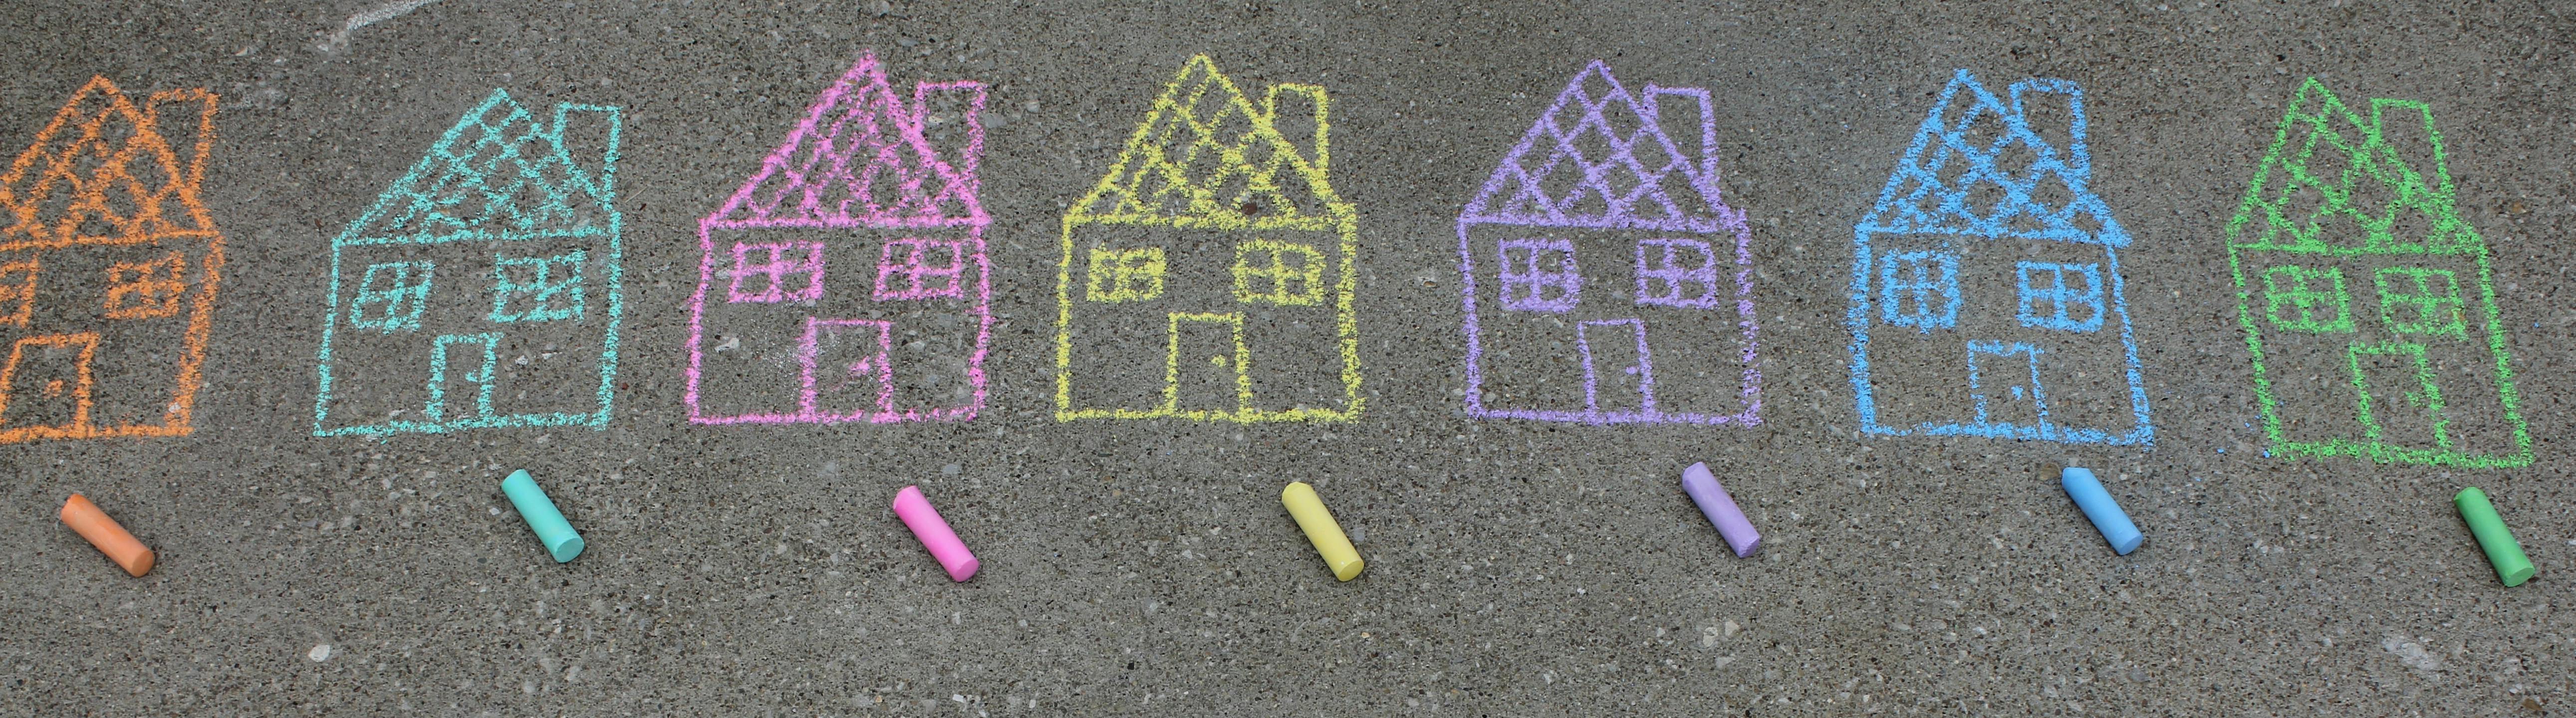 Children's chalk drawing of colourful houses